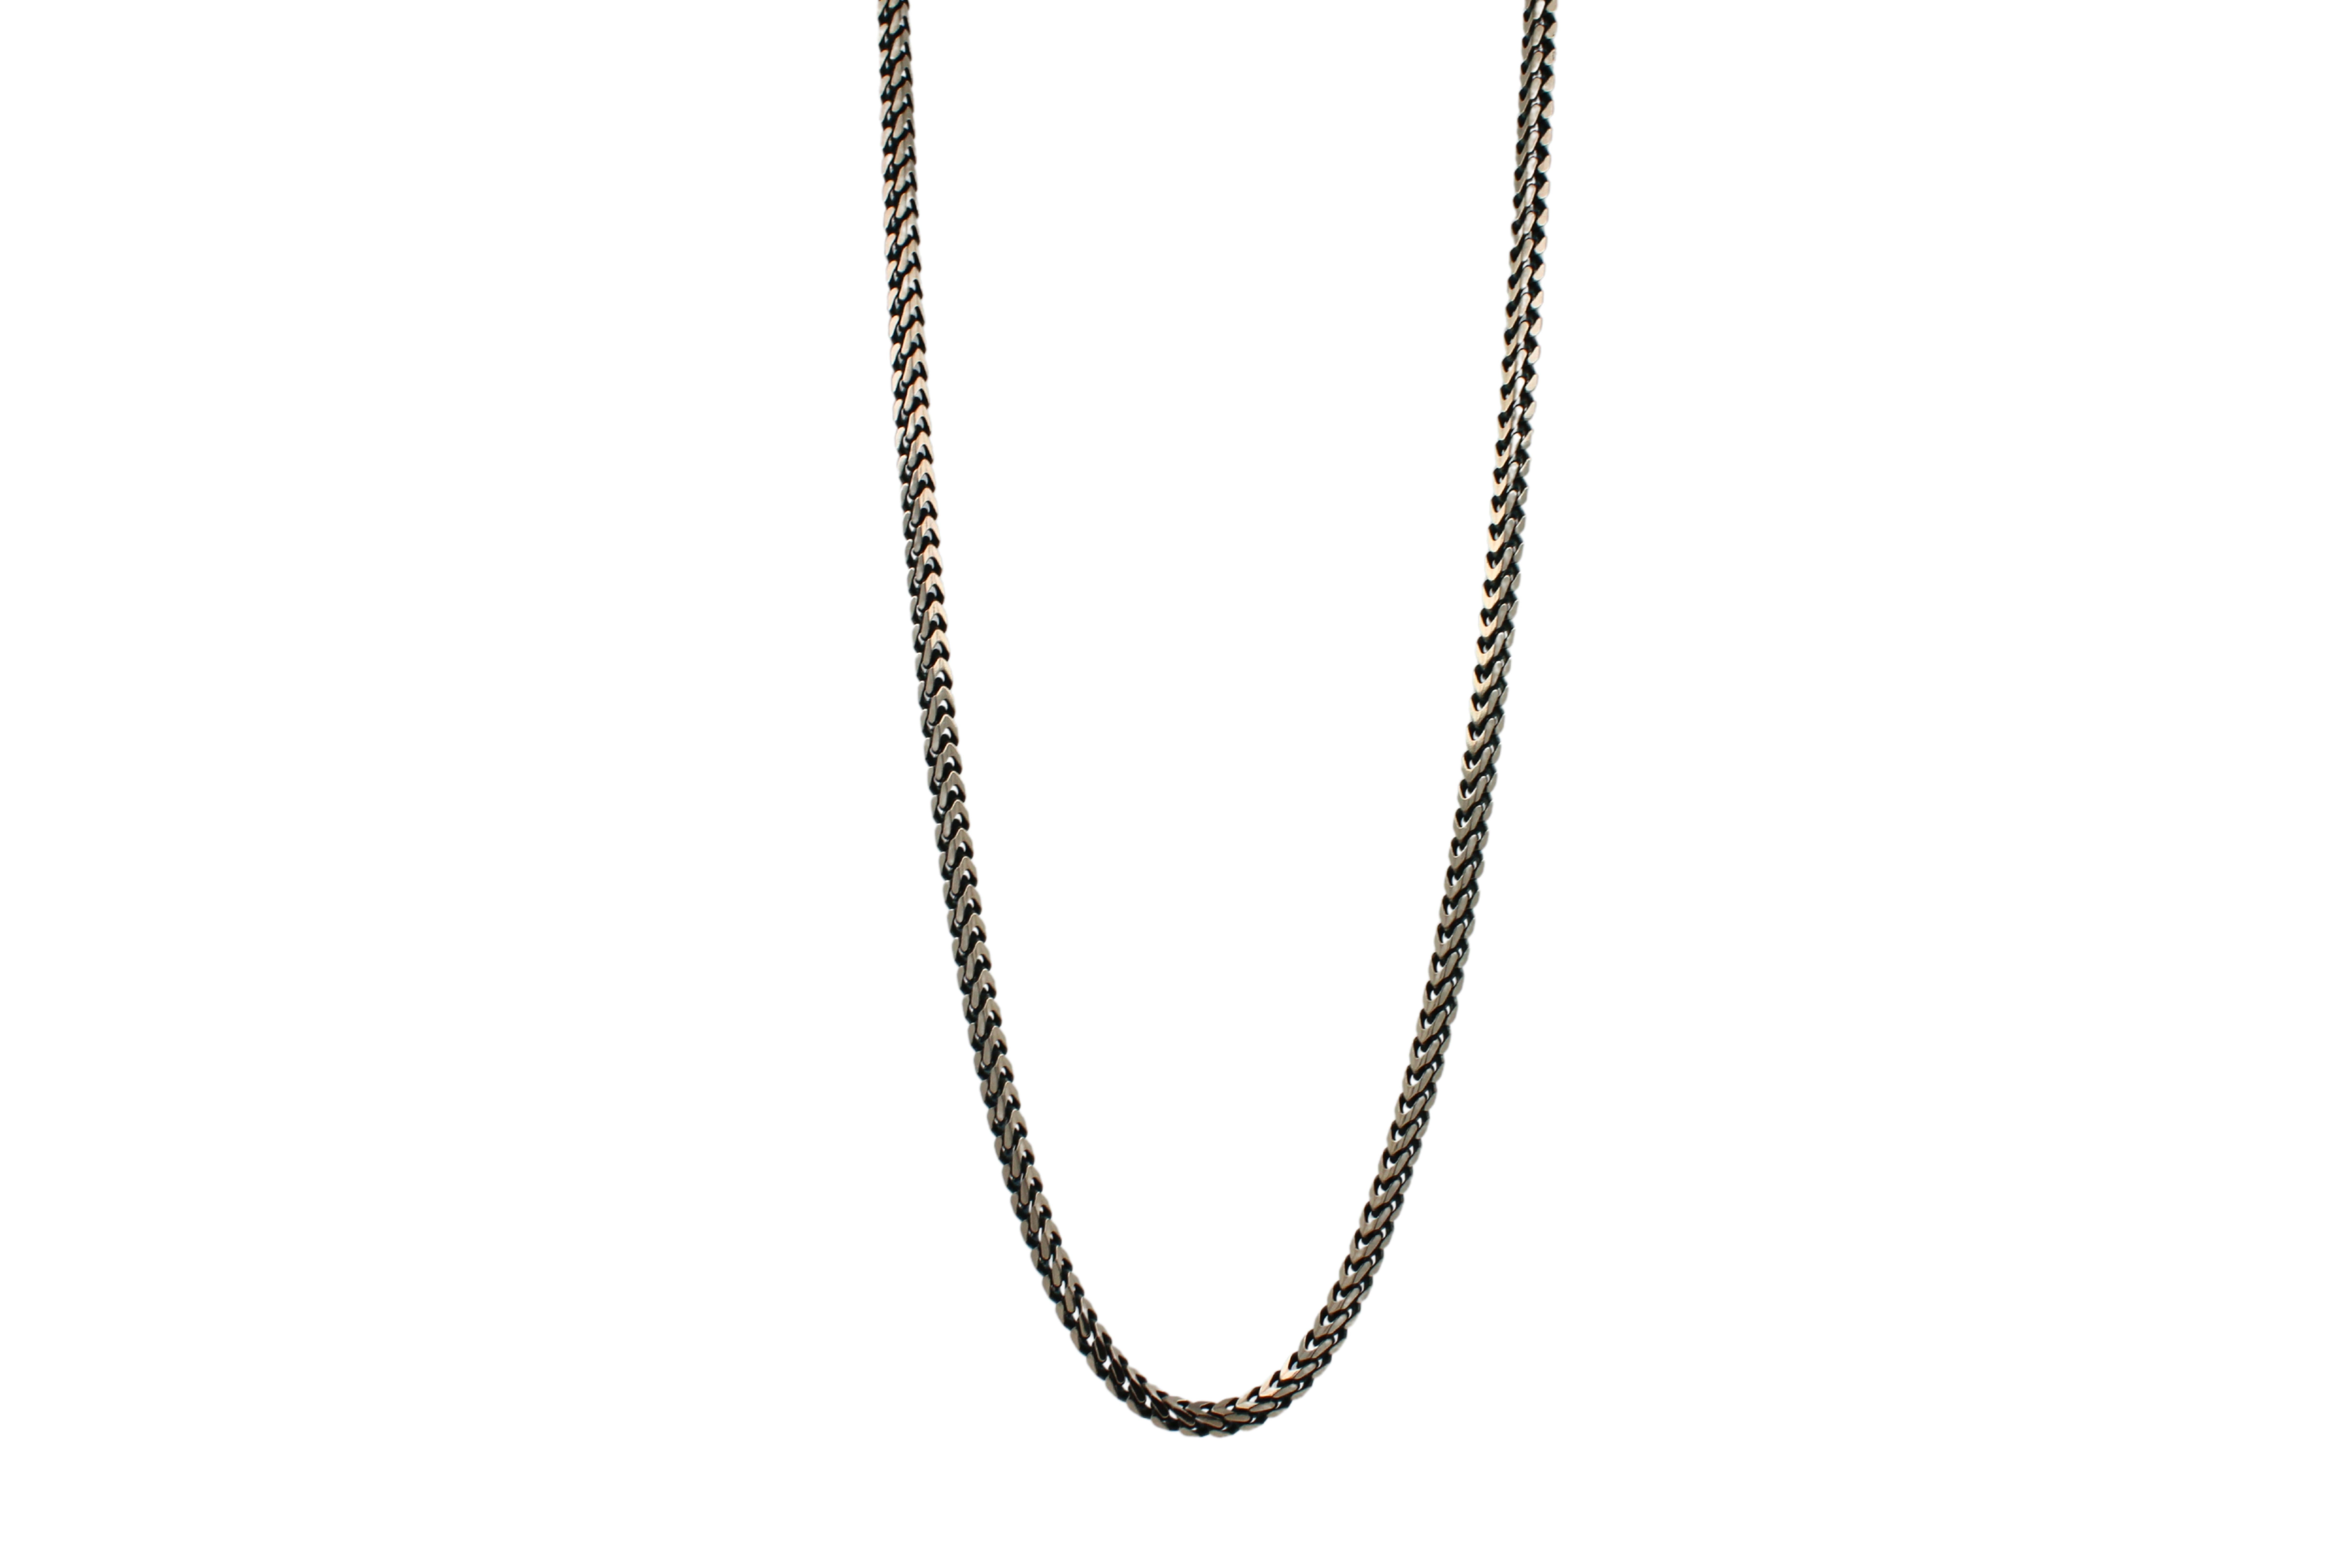 Franco Link Fancy Link 925 Sterling Silver Chain Necklace
•	20 inches length 
•	24 grams 
•	3.0 mm width
•       Solid Sterling Silver 925


